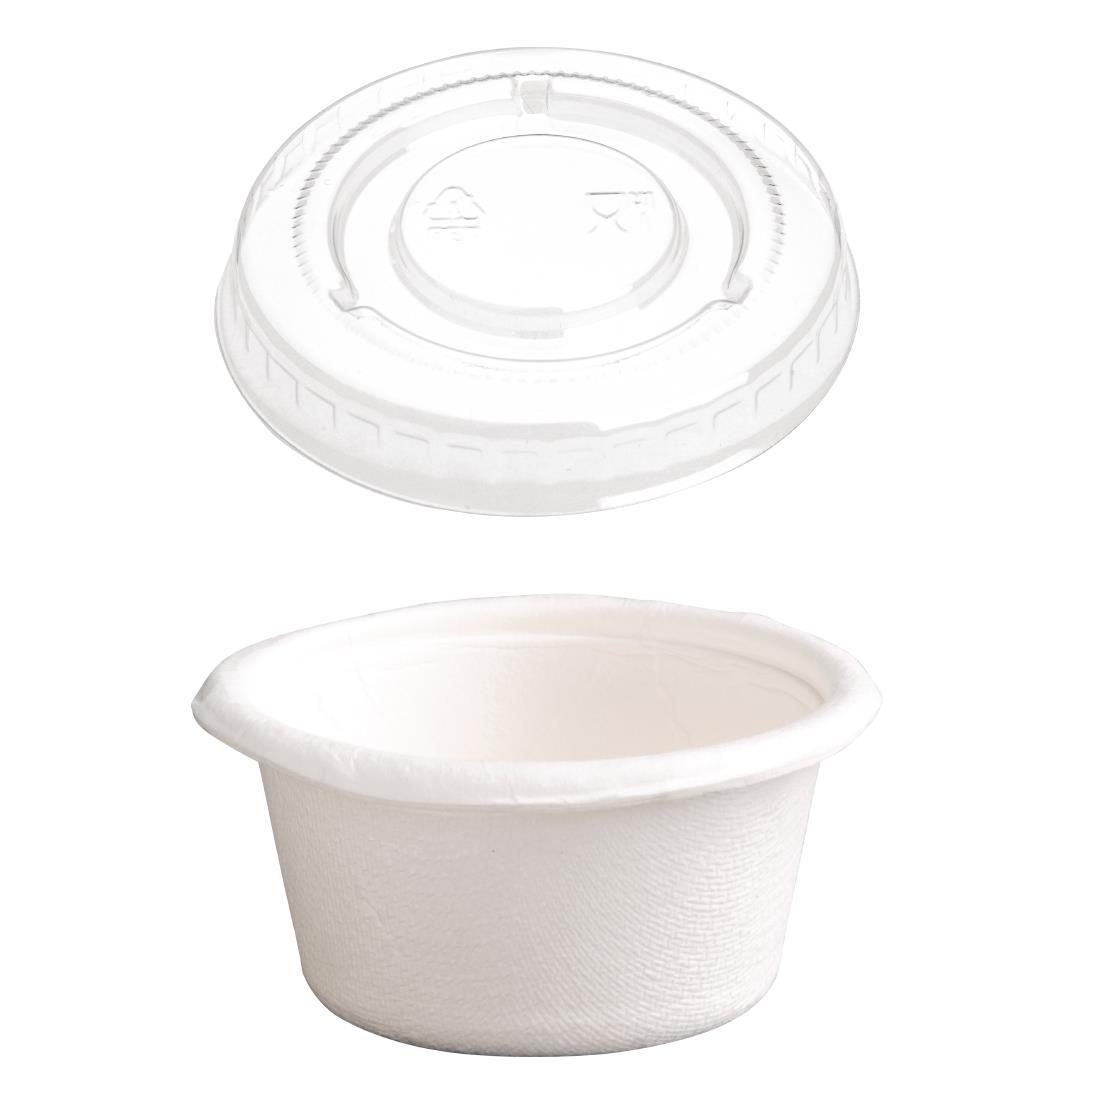 Fiesta Compostable Bagasse Condiment Pots 59ml / 2oz With PET Lids (Pack of 1000) - SA628  - 1